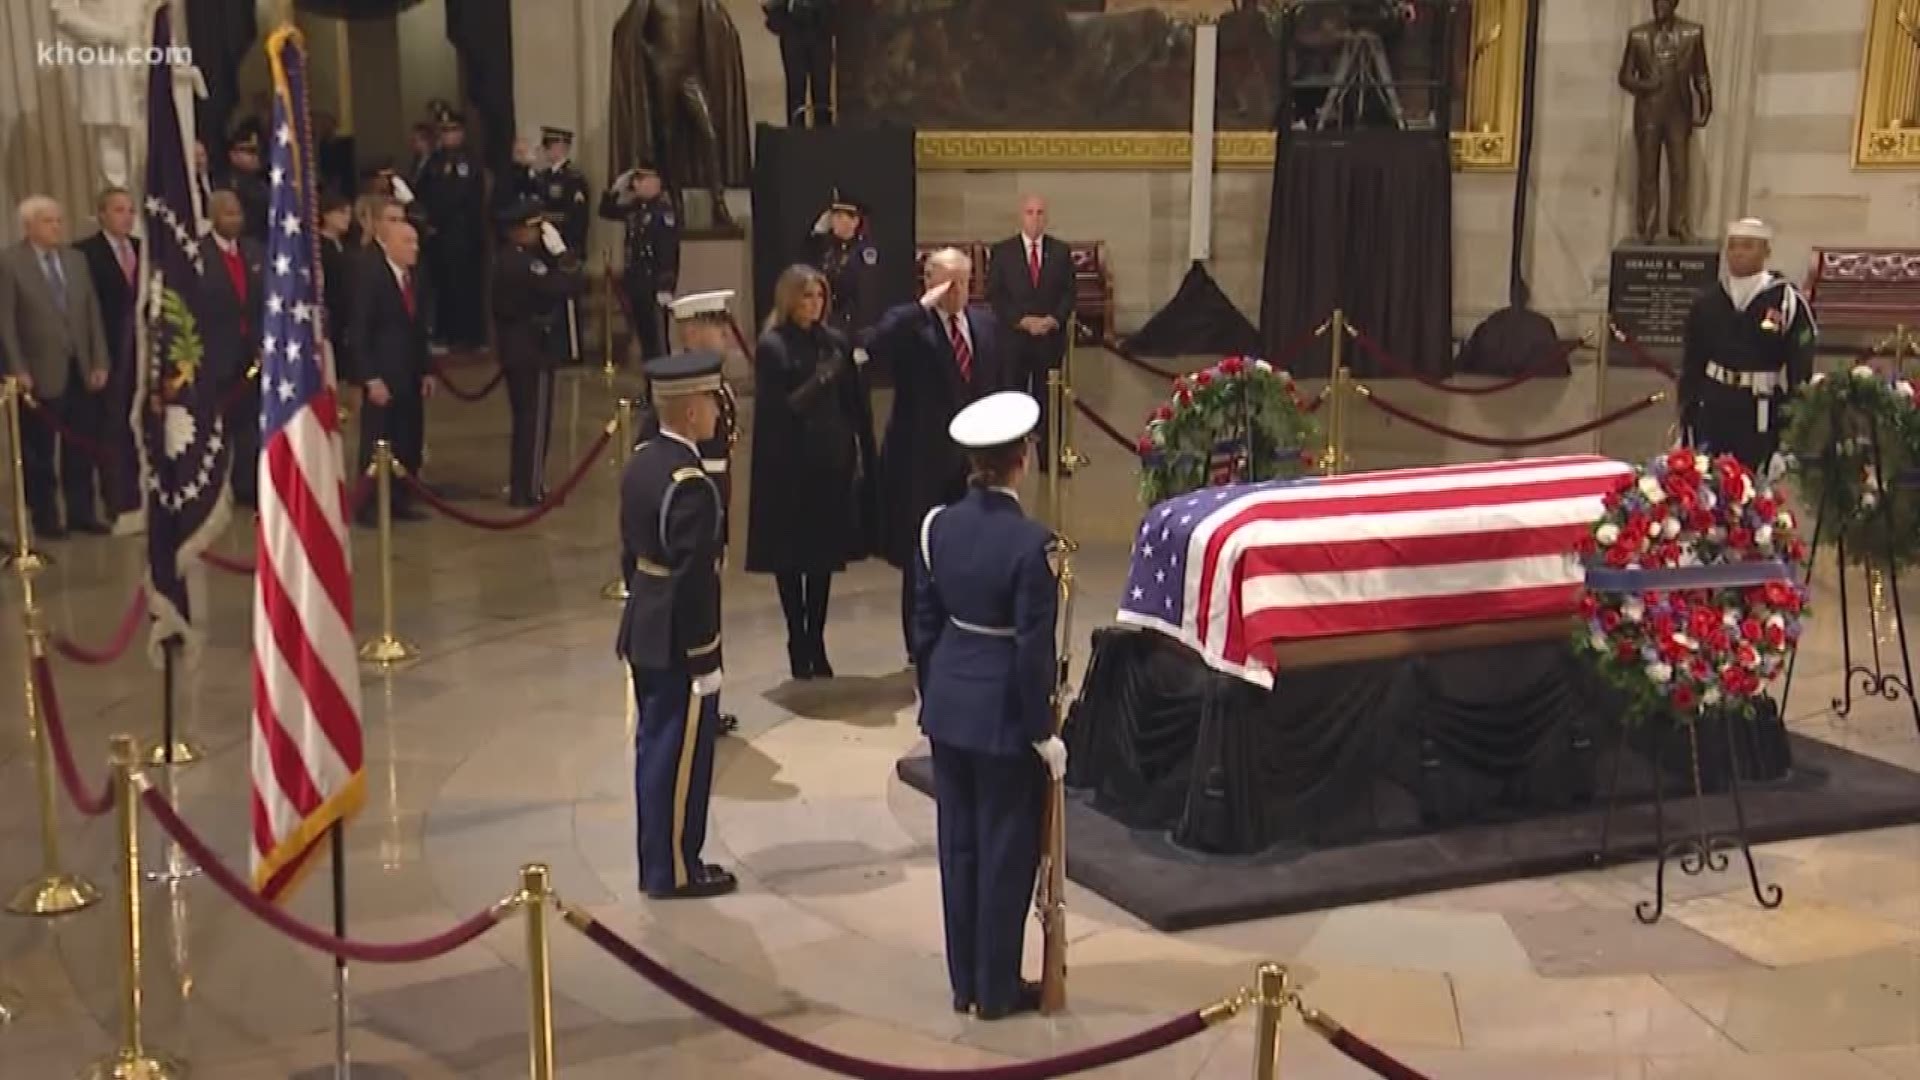 Family, friends and dignitaries paid tribute to President George H.W. Bush Monday in both Houston and Washington, D.C.